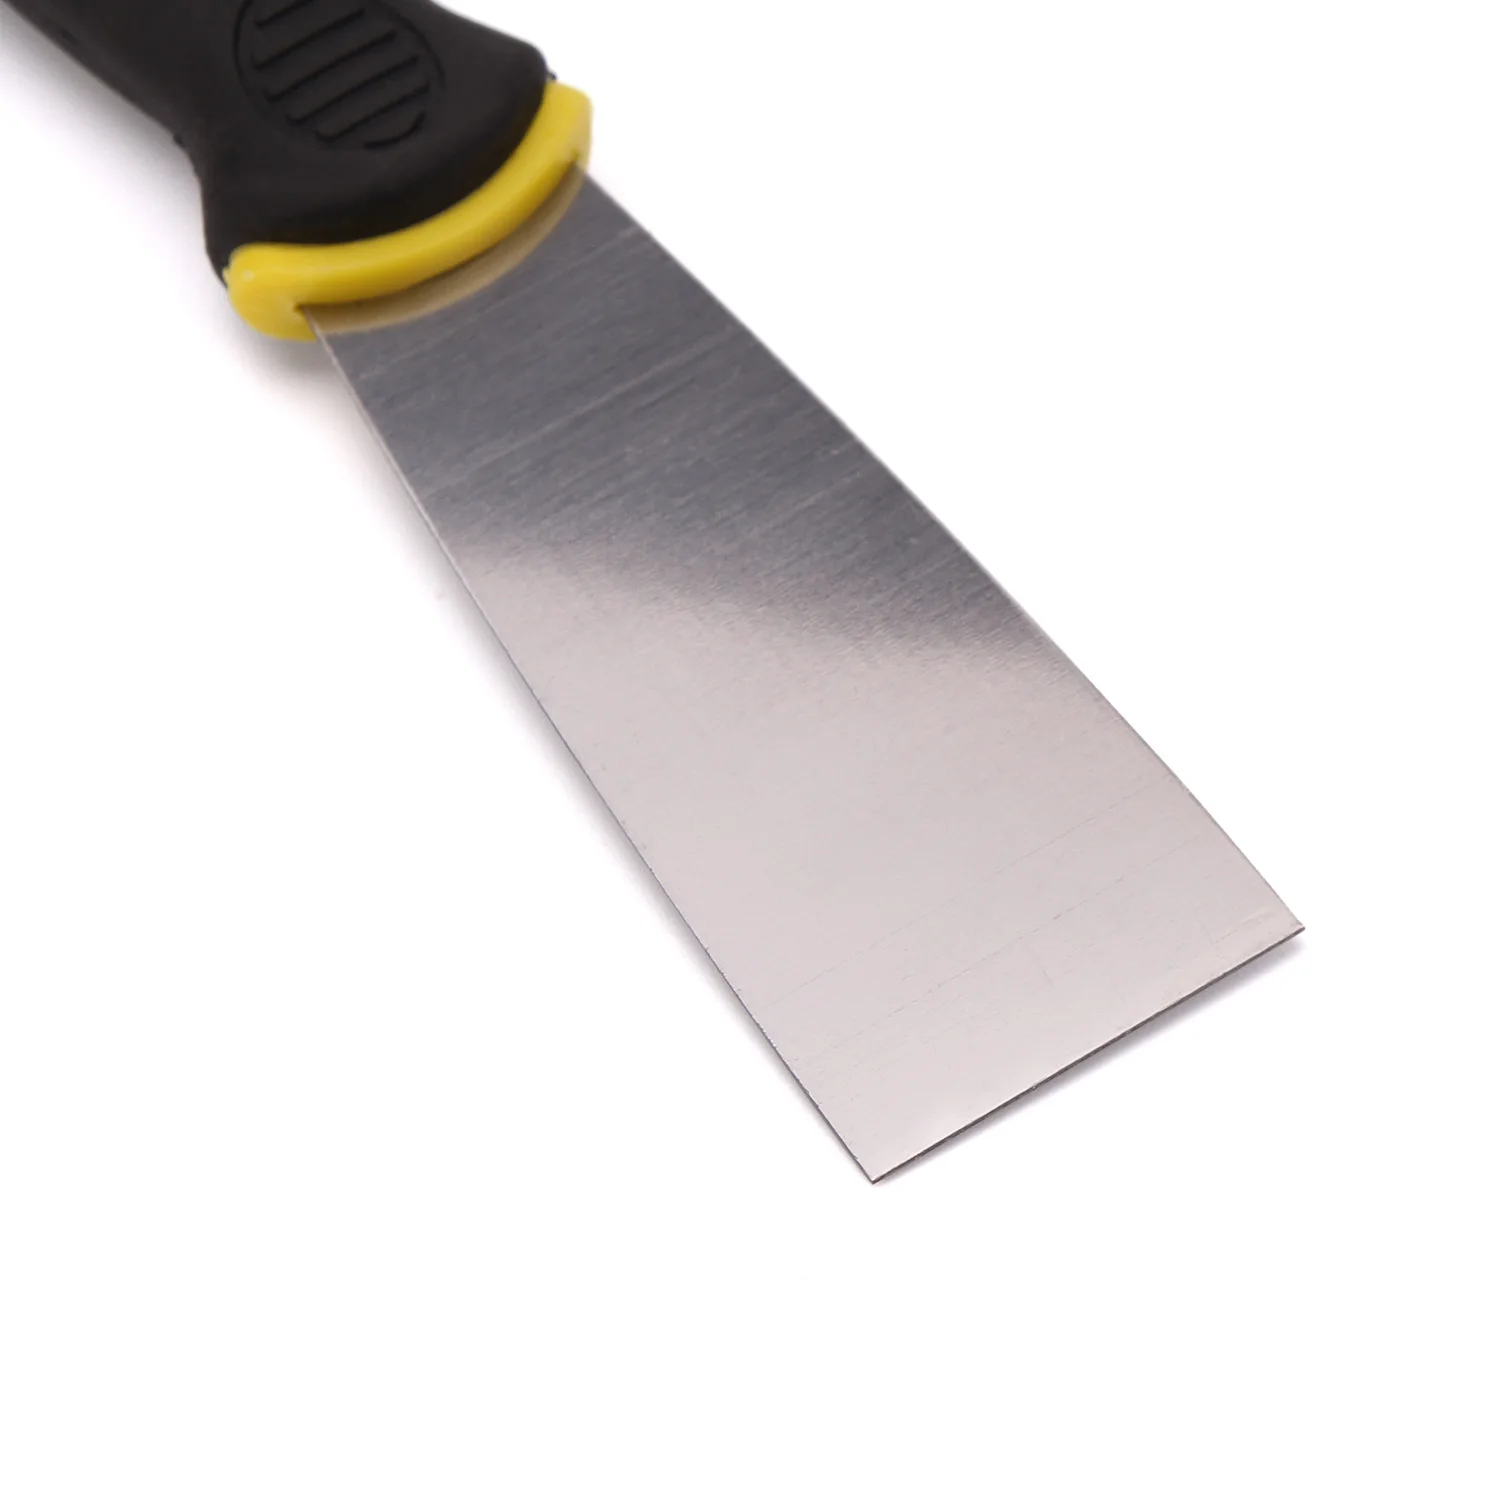 Professional Scraper Putty Knife Spatulas with Yellow Plastic ABS Handle